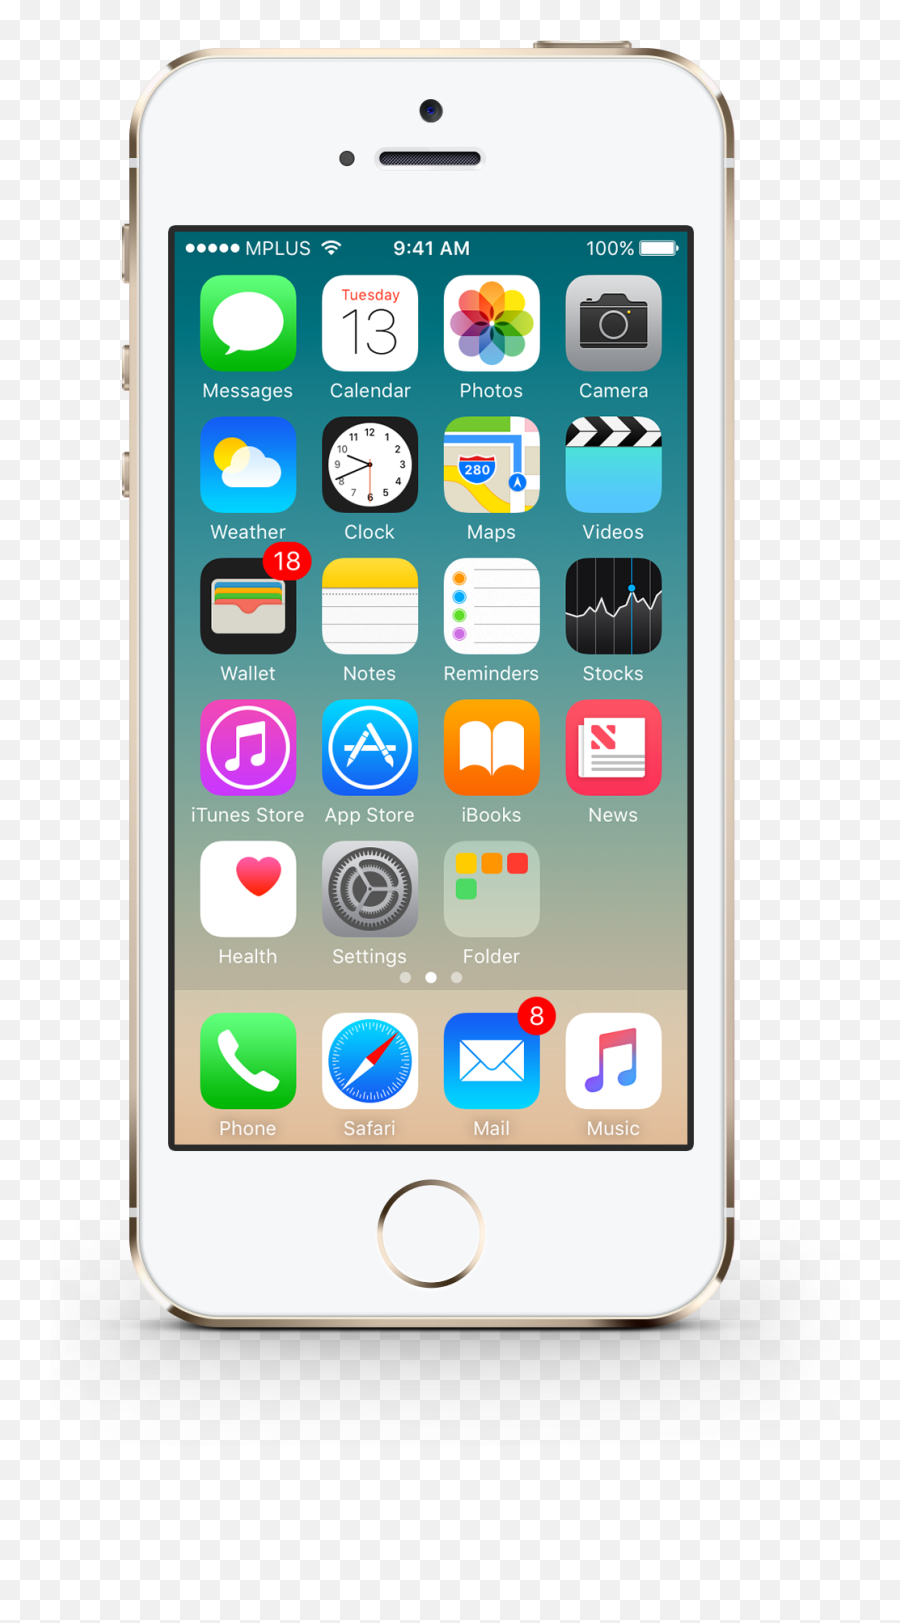 Download Hd Iphone 5s Lcd Replacement - Ipods At Walmart Emoji,How To Get Emojis On Iphone 5s